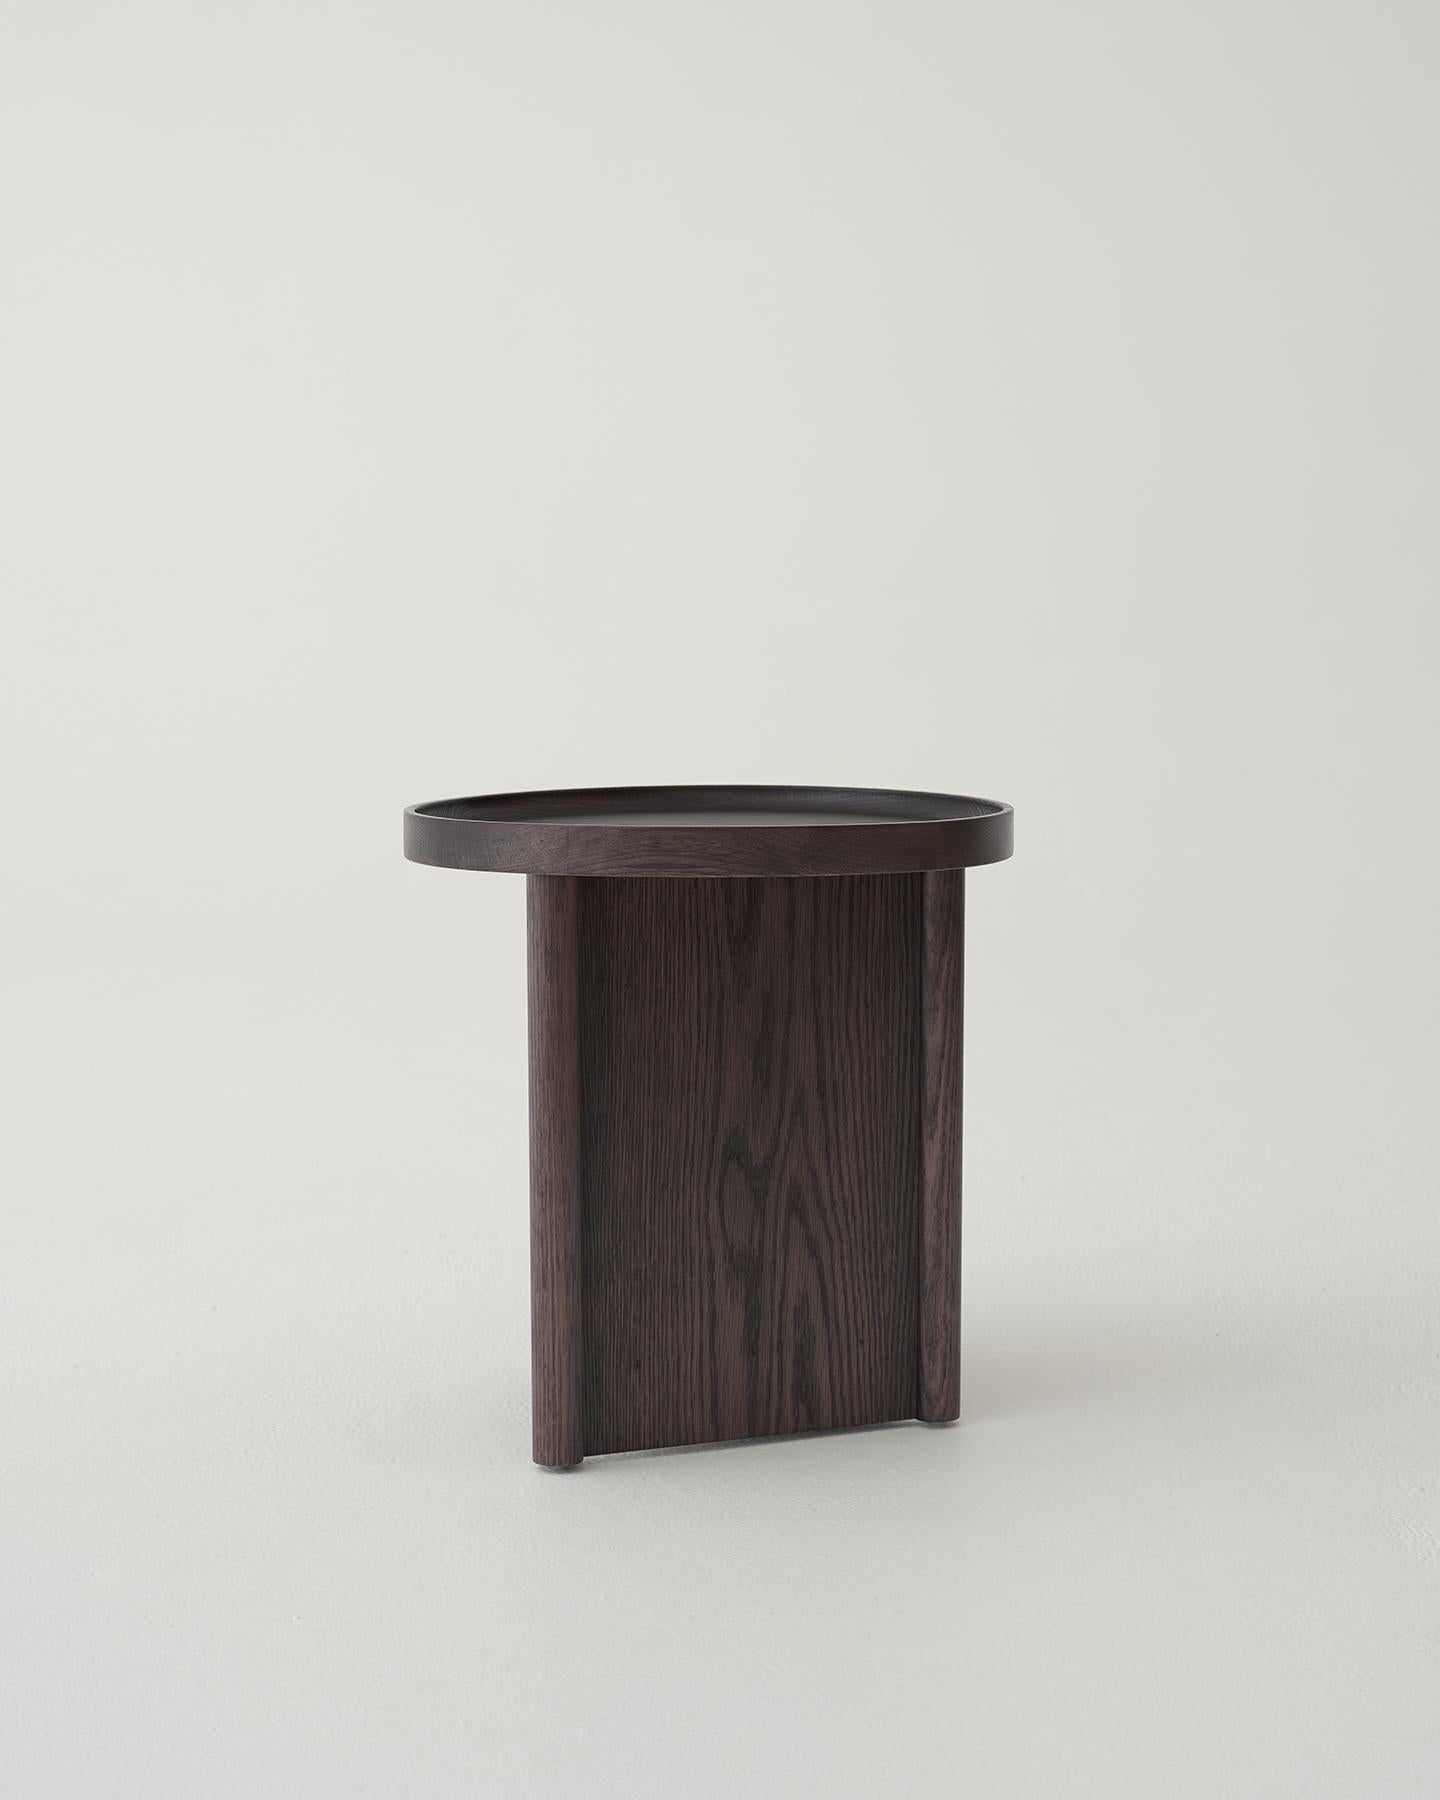 The Malibu Side Table is a derivative of the Malibu table range; the table re-interprets the classic shape of the surfboard with sumptuous edges that are pleasing to touch. Light-weight and versatile and available in custom finish options.

Our